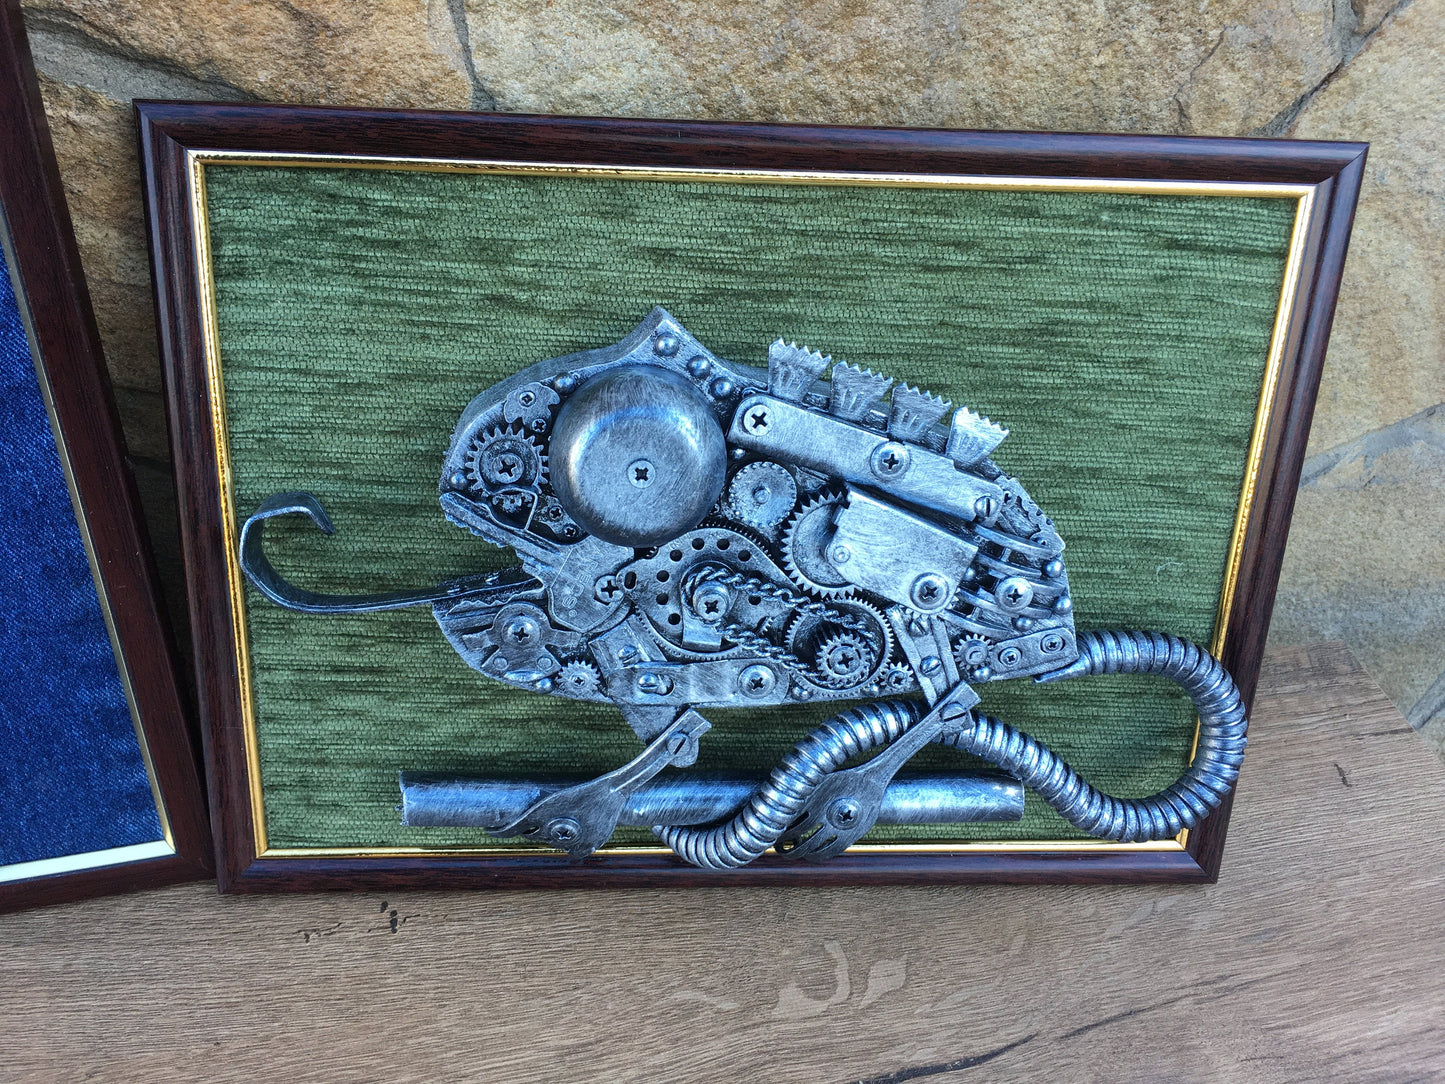 Steampunk painting, steampunk wall decor, steampunk wall hanging, steampunk wall art, steampunk wall sculpture, seahorse, chameleon, fish